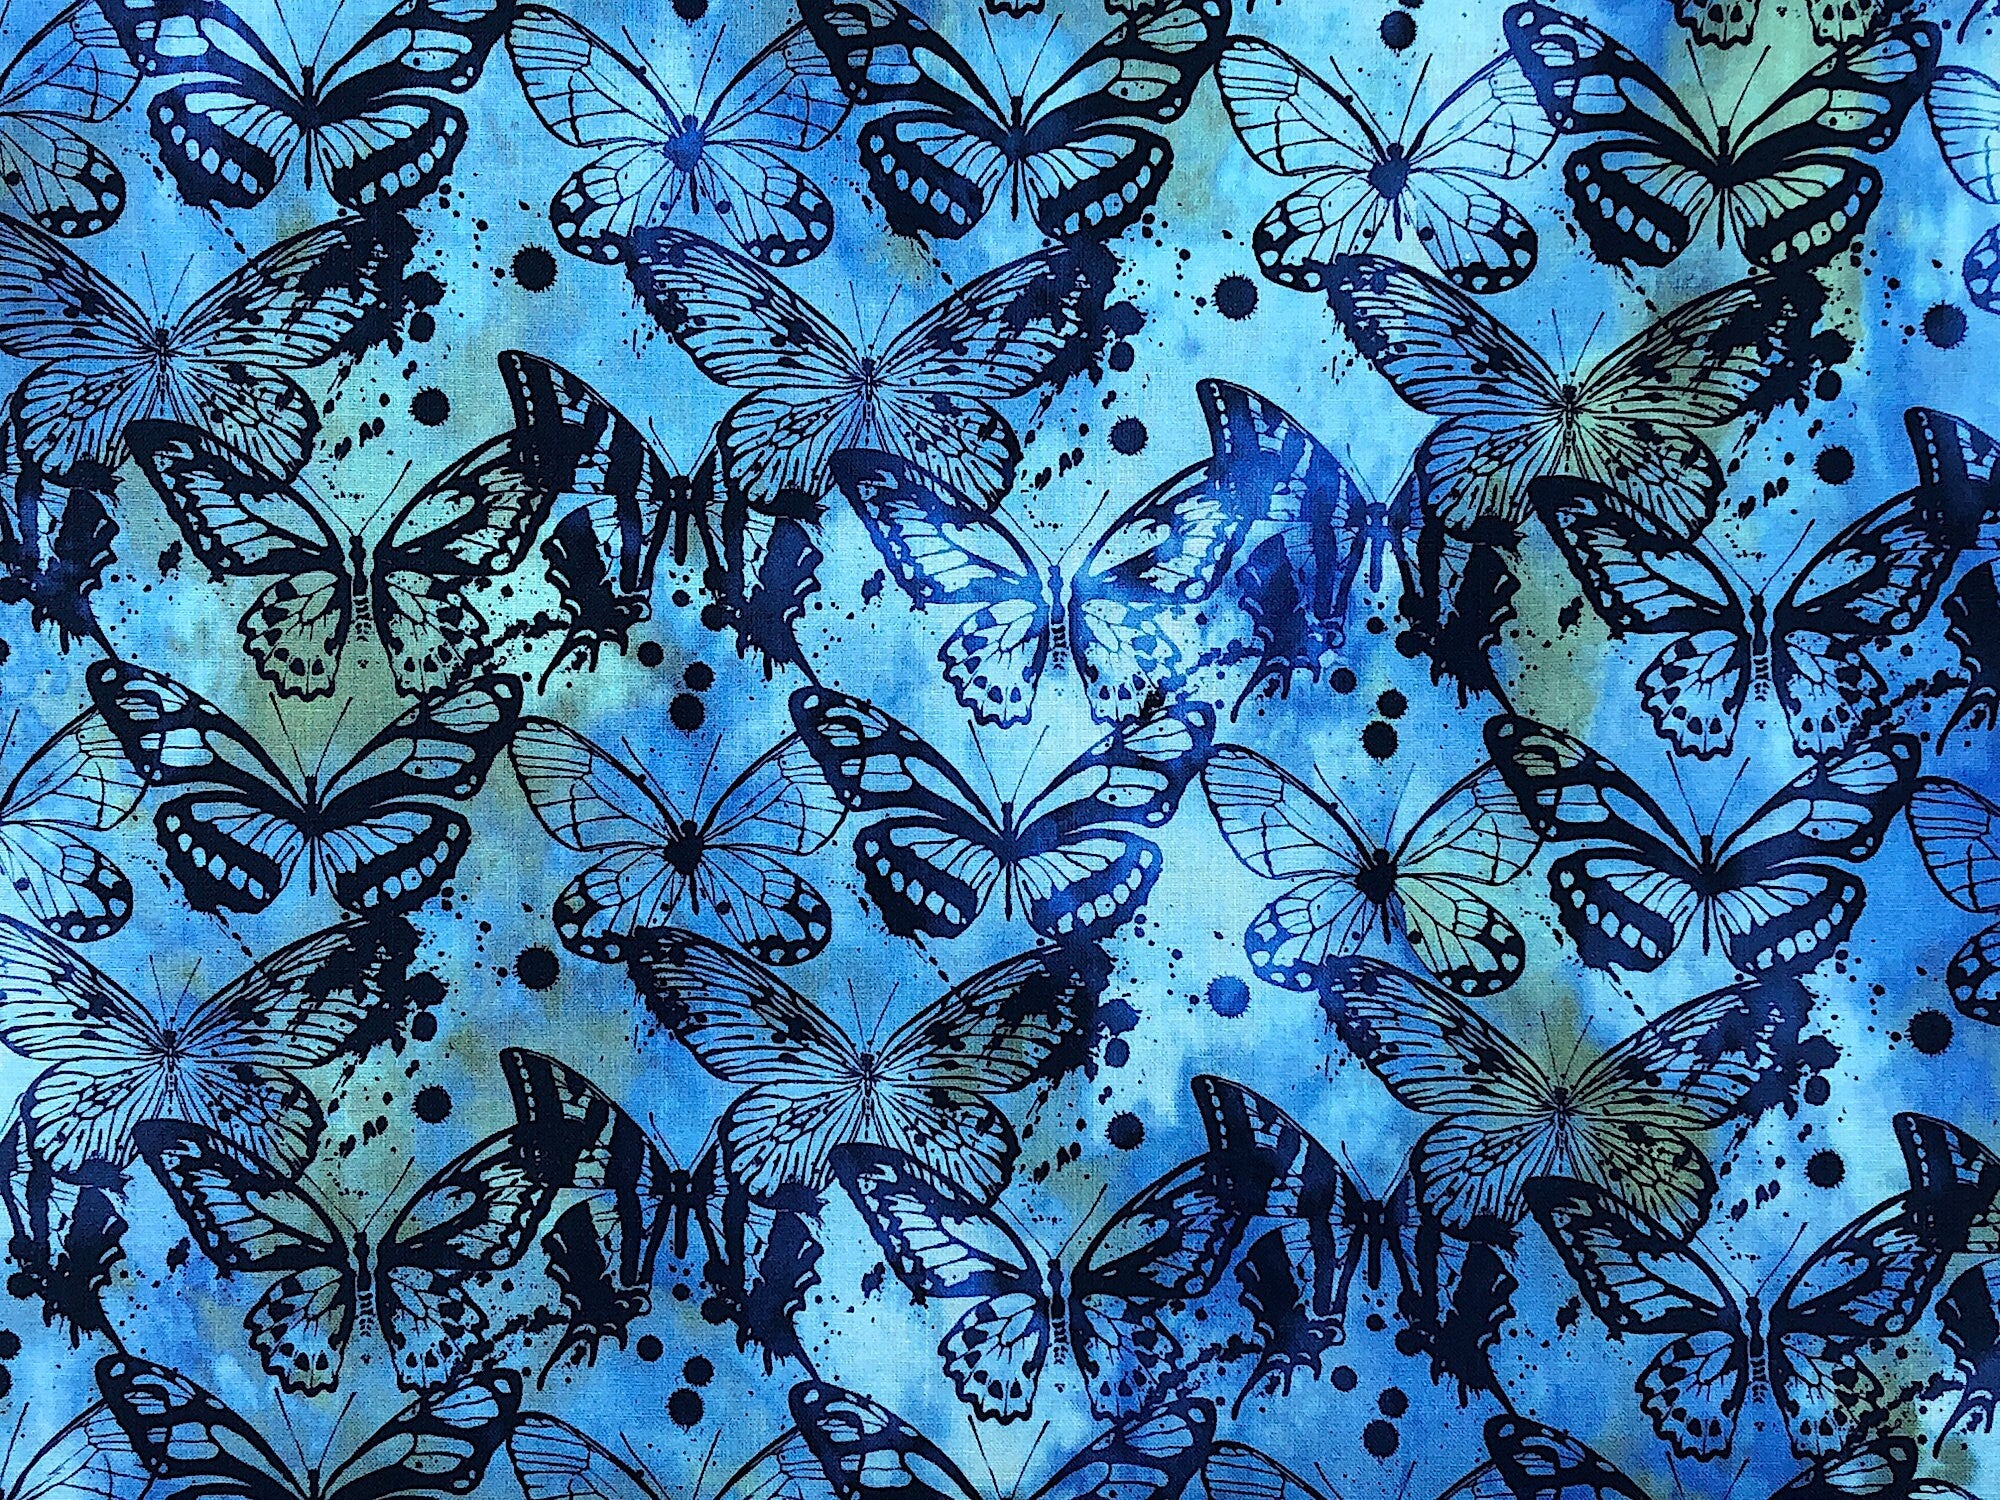 This batik fabric is called Seasons and is covered with butterflies. The background has a mixture of blue and greens in various shades